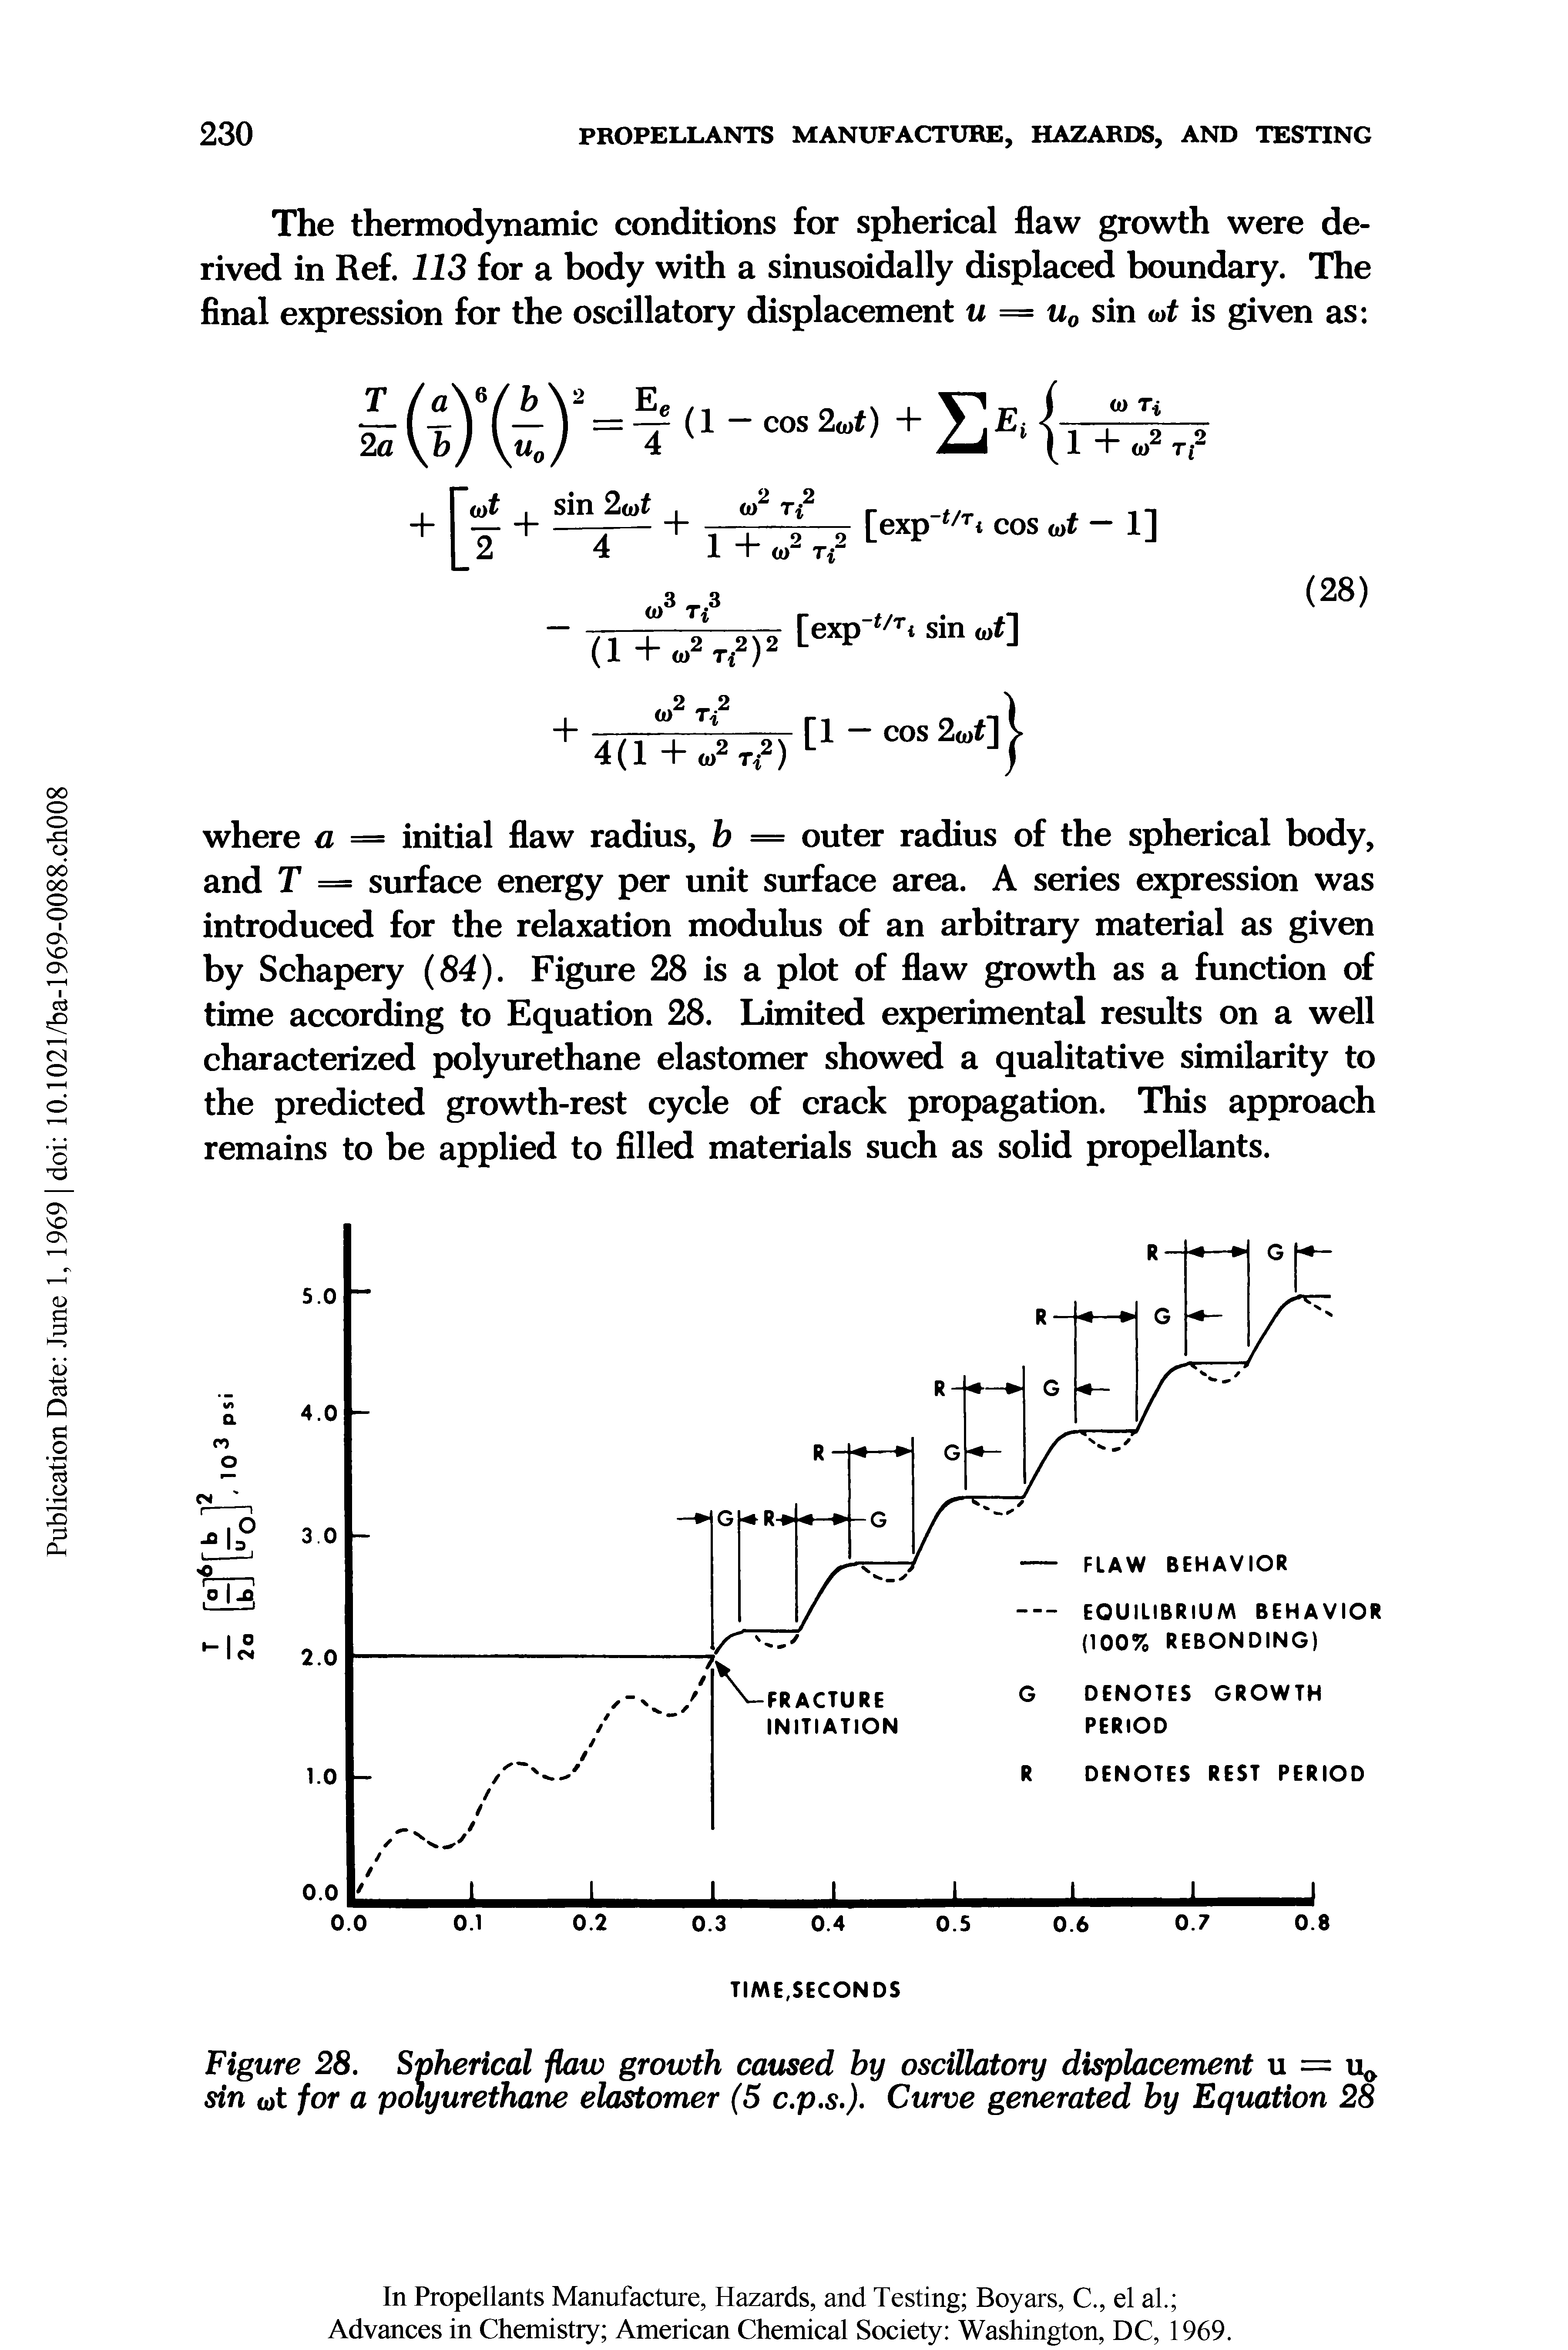 Figure 28. Spherical flaw growth caused by oscillatory displacement u = u sin wt for a polyurethane elastomer (5 c.p.s.). Curve generated by Equation 28...